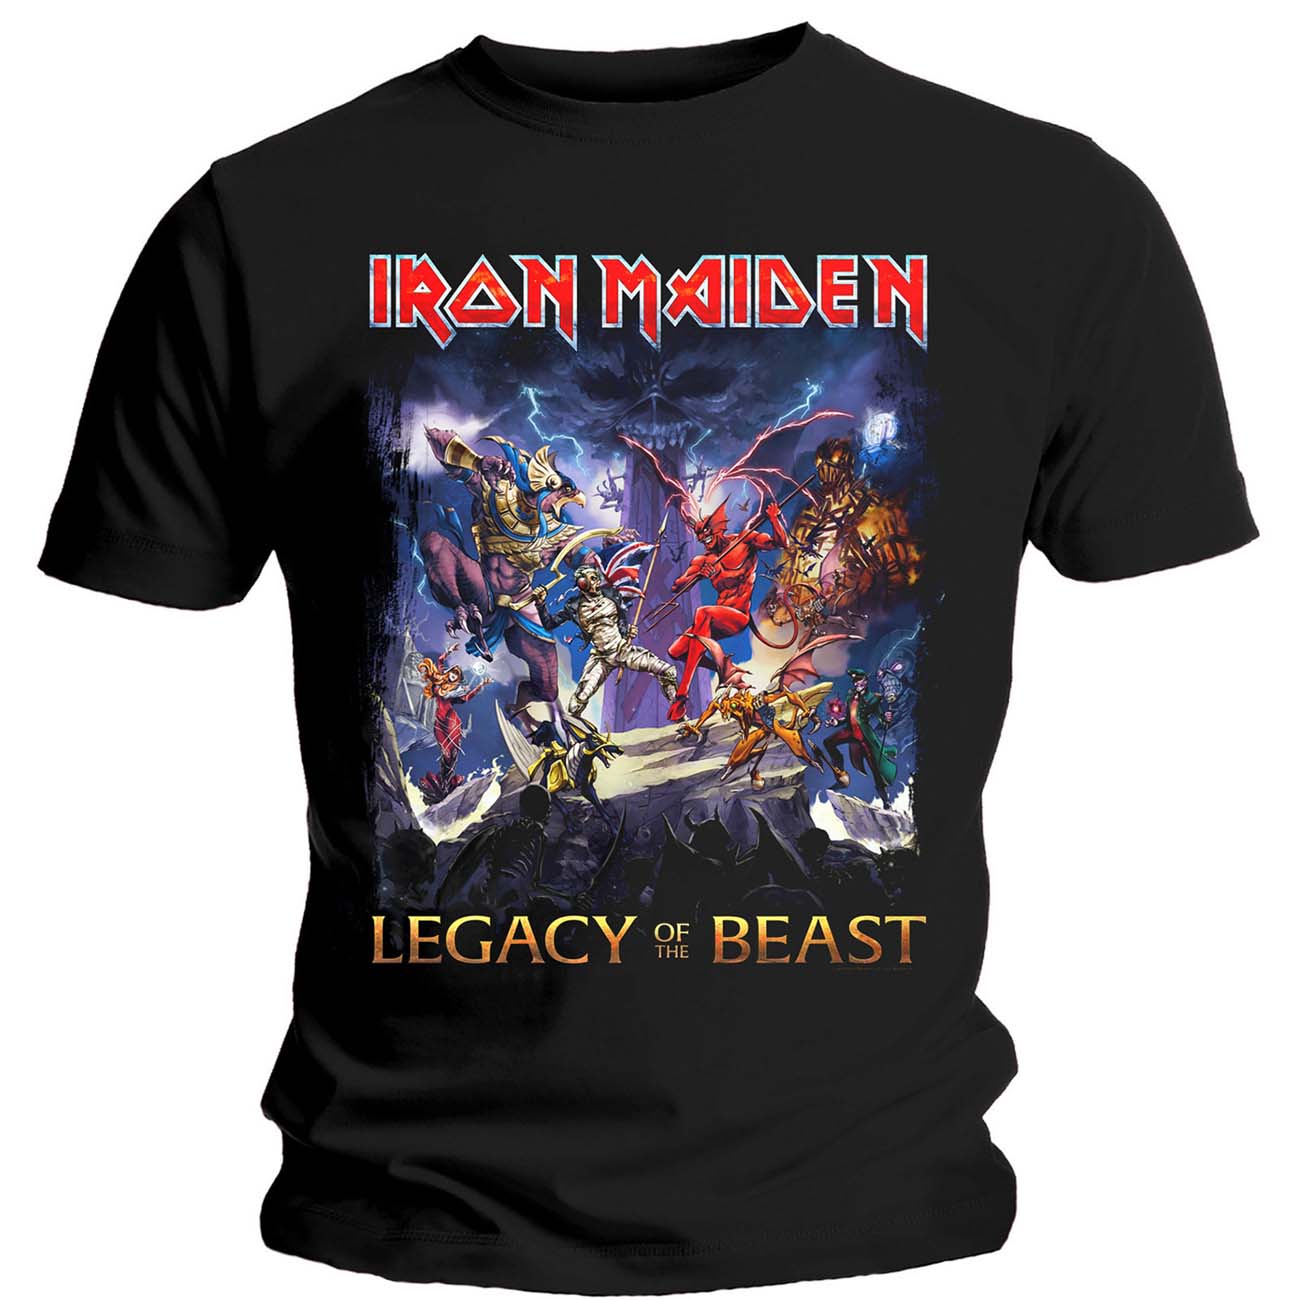 Iron Maiden T-Shirt: Legacy of the Beast